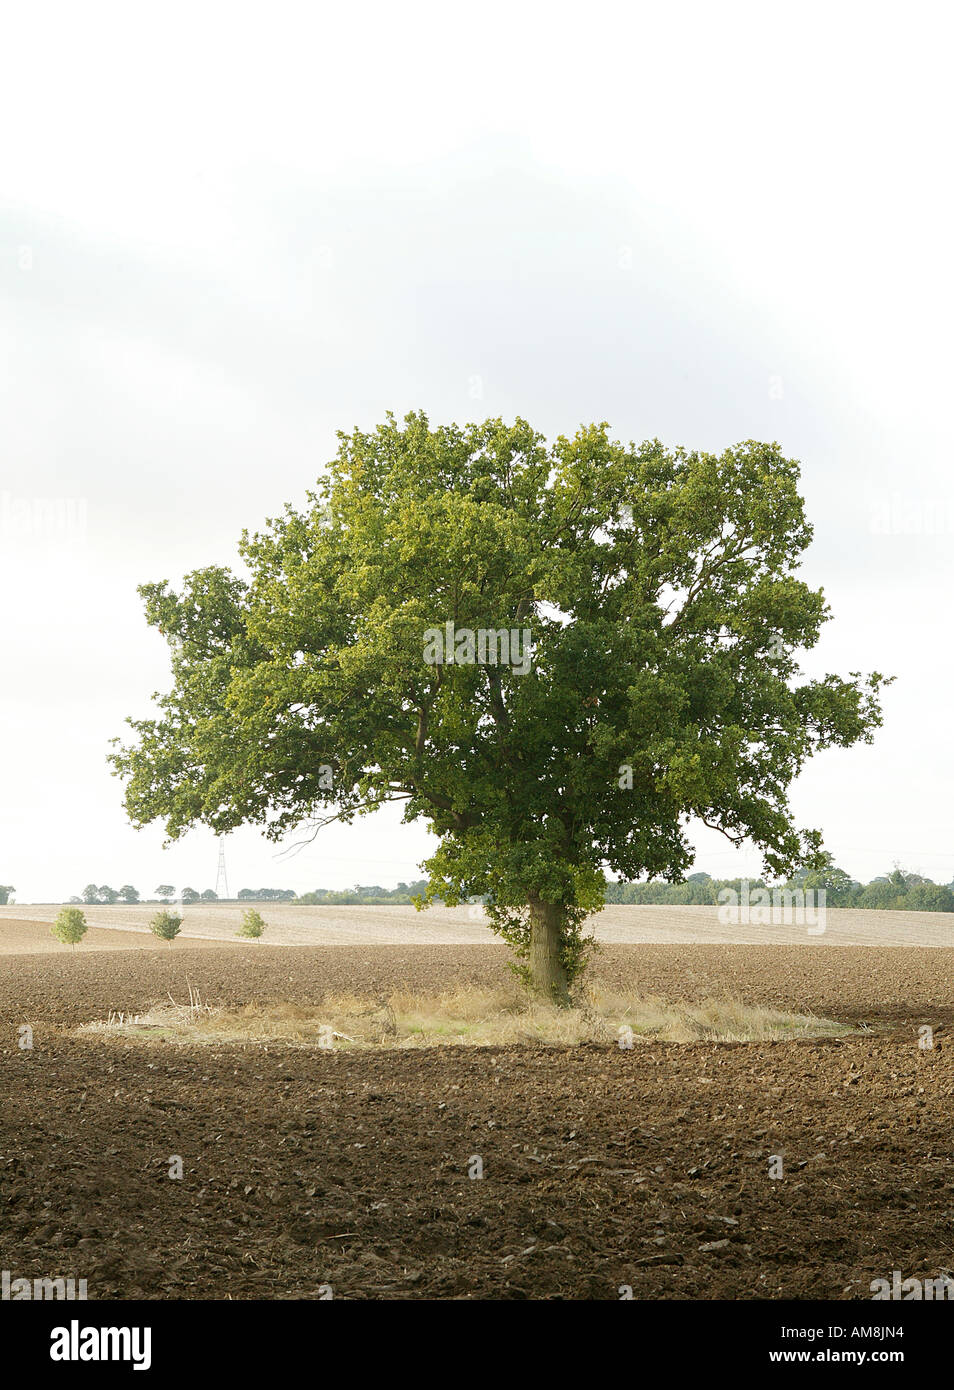 vertical upright single tree featured in open expansive rural landscape Stock Photo